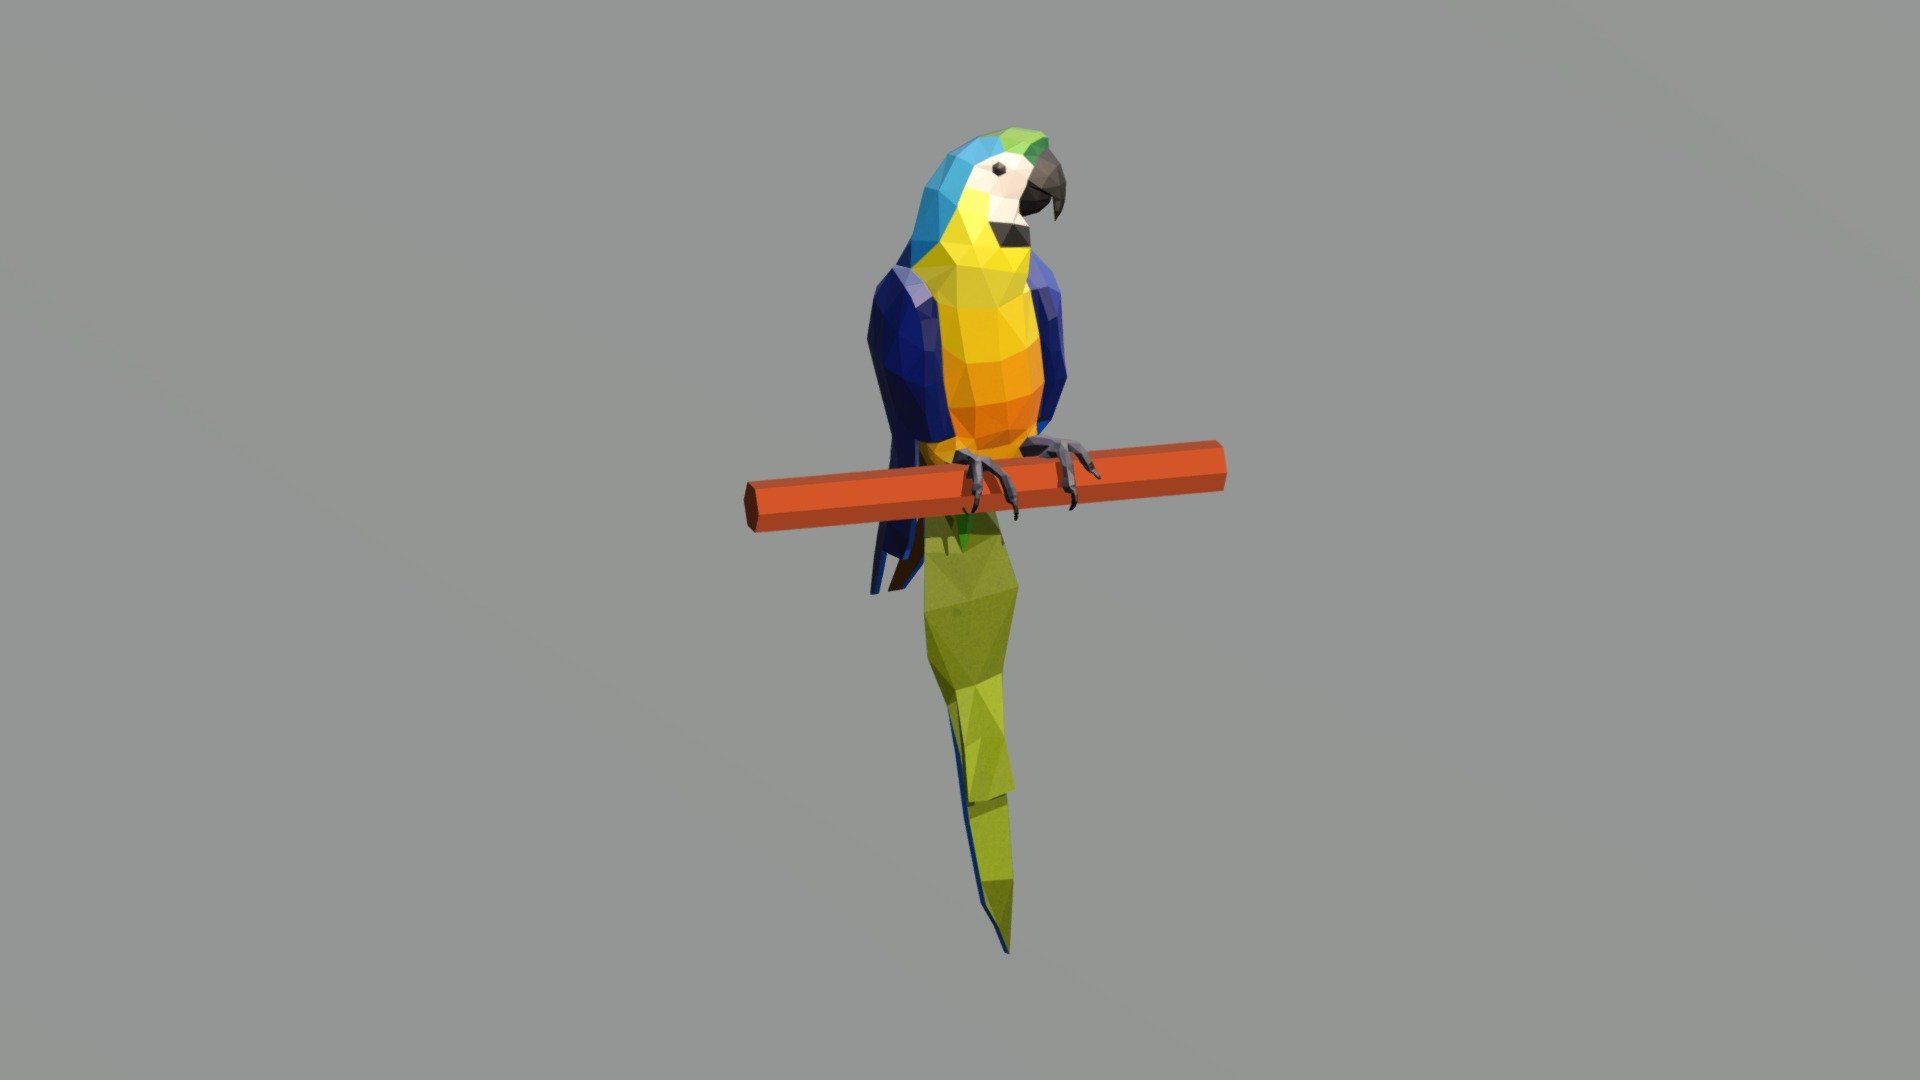 Hello, I hope you guys like, comment, follow and download my 3D models! This is a Macaw, it is low poly. Everyday, I will be making and uploading cool 3D models. As a result, plz follow me. Like, comment, follow and download my 3D models or you will become a low poly person

BONUS:

1) Subscribe to my YOUTUBE CHANNEL and I will make you popular by liking all your models. My      YOUTUBE CHANNEL: FIELDFLY3R

2) Join my DISCORD SERVER and I will join your DISCORD SERVER if you have DISCORD. 
    My DISCORD: FIELDFLY3R

3) Follow me on TIK TOK and I will also follow you on TIK TOK if you have an ACCOUNT. My TIK TOK: FIELDFLY3R

4) Friend me on ROBLOX and I will accept the REQUEST. My ROBLOX: Jerrickbo - Low Poly Macaw - 3D model by FIELDFLY3R 3d model